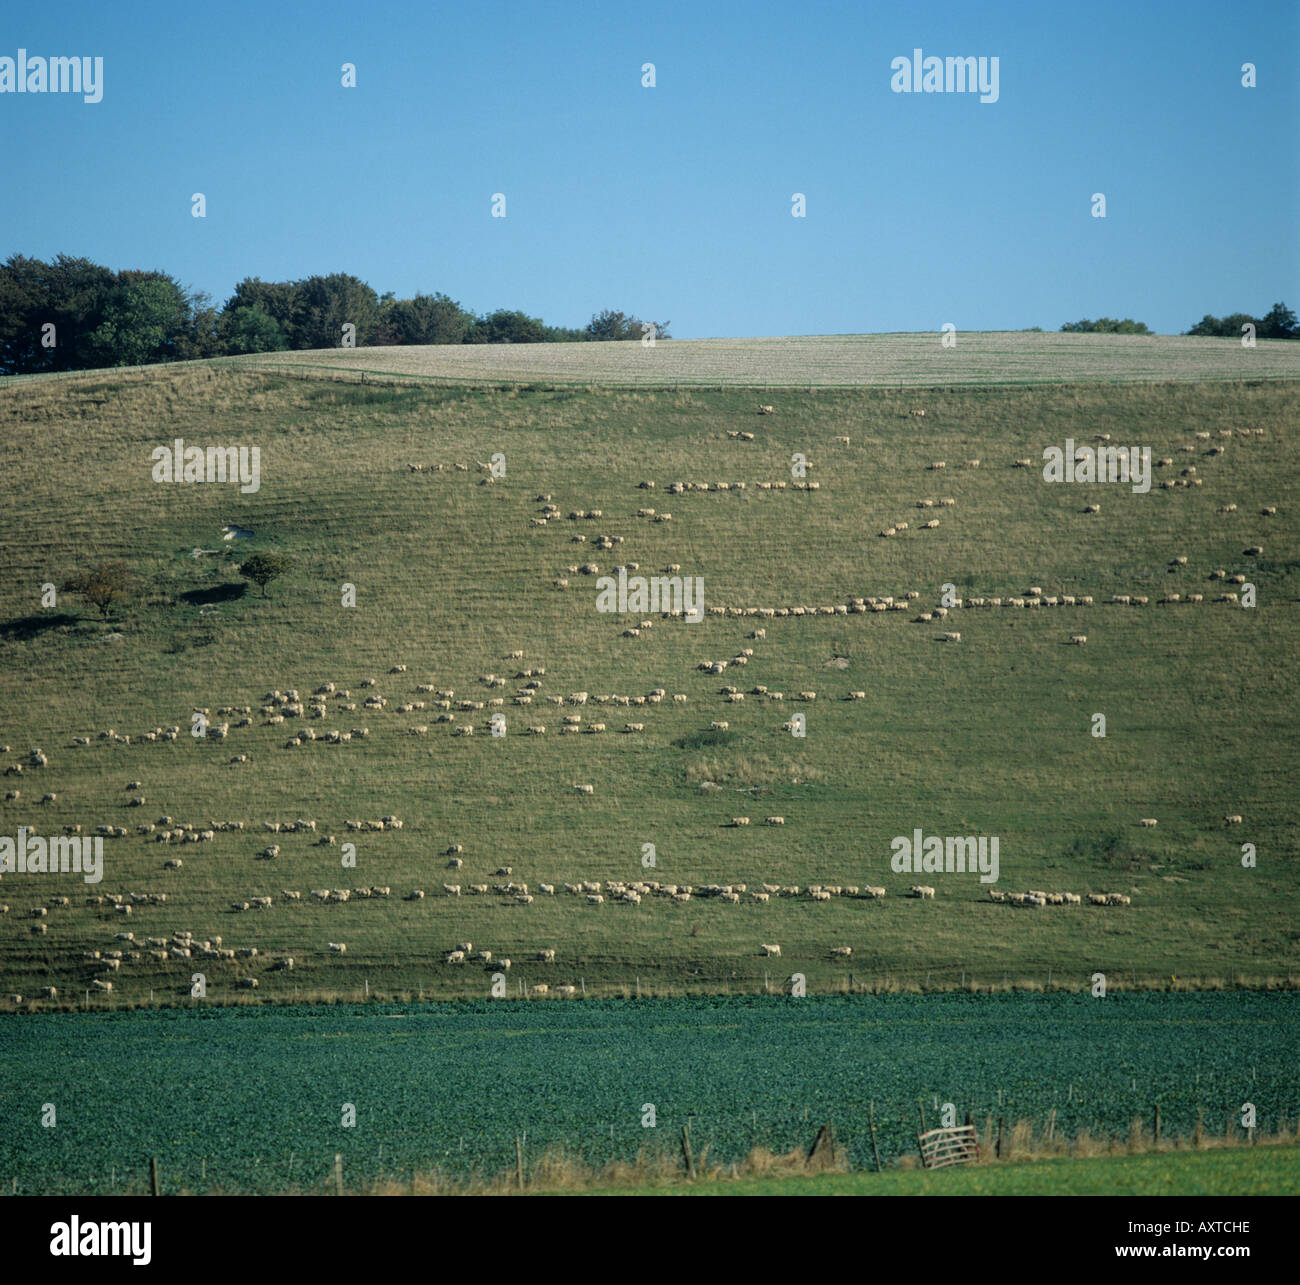 Sheep walking in lines on steep downland slope Stock Photo